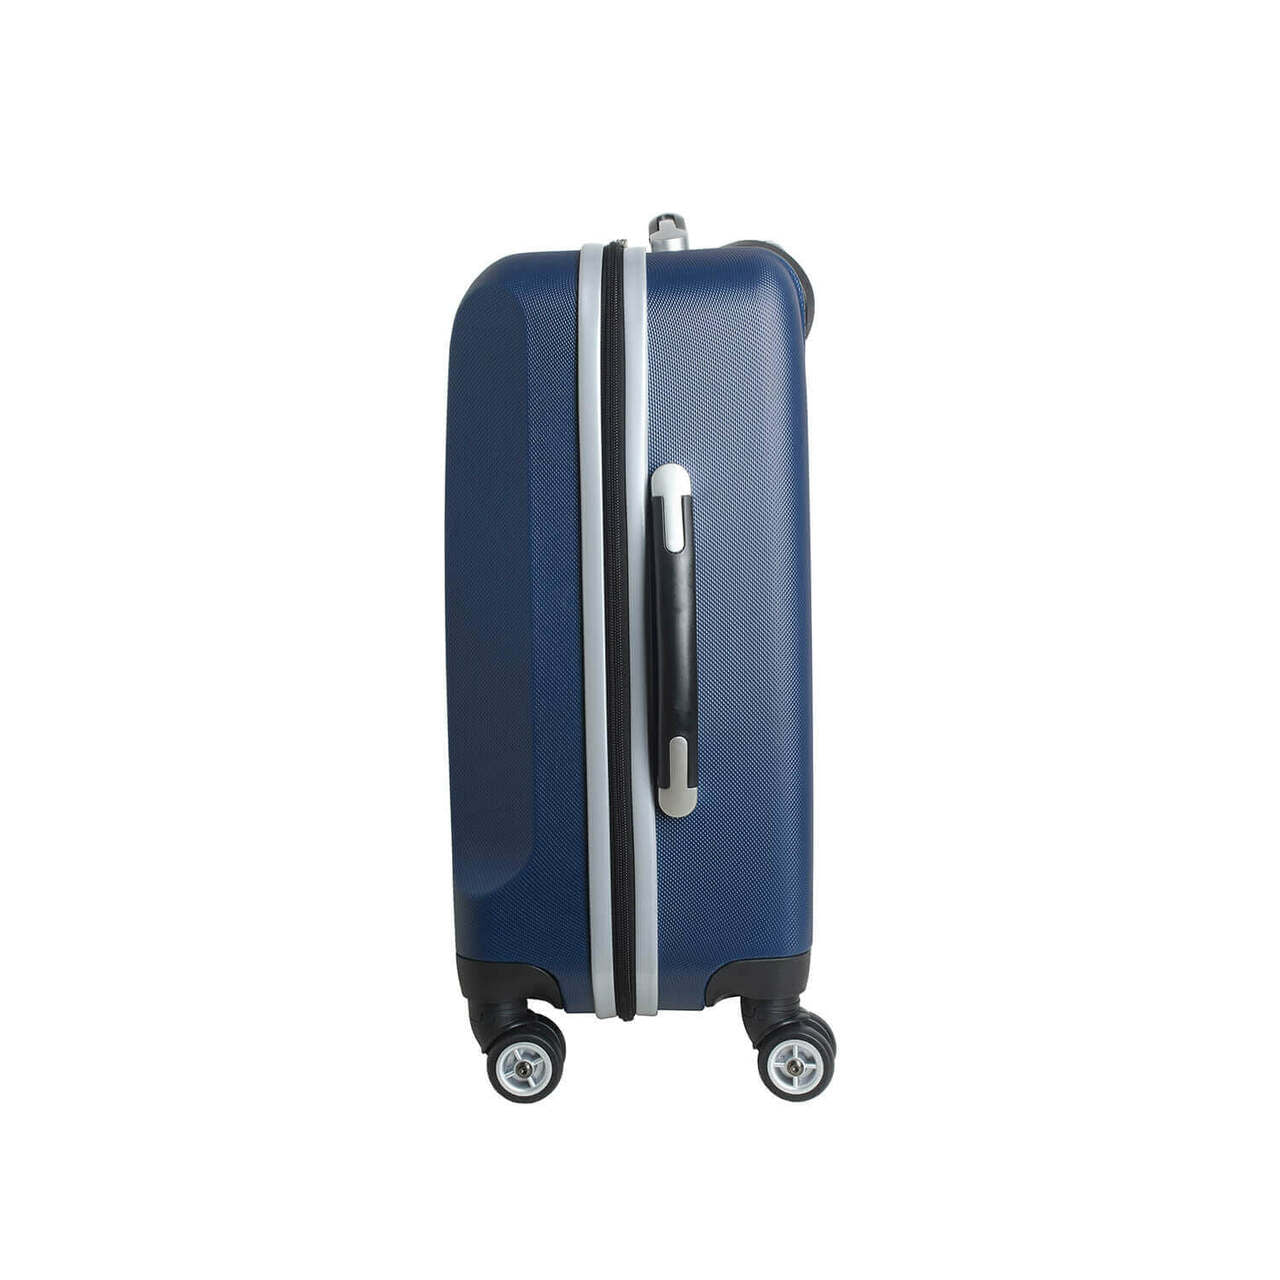 Tennessee Volunteers 20" Navy Domestic Carry-on Spinner